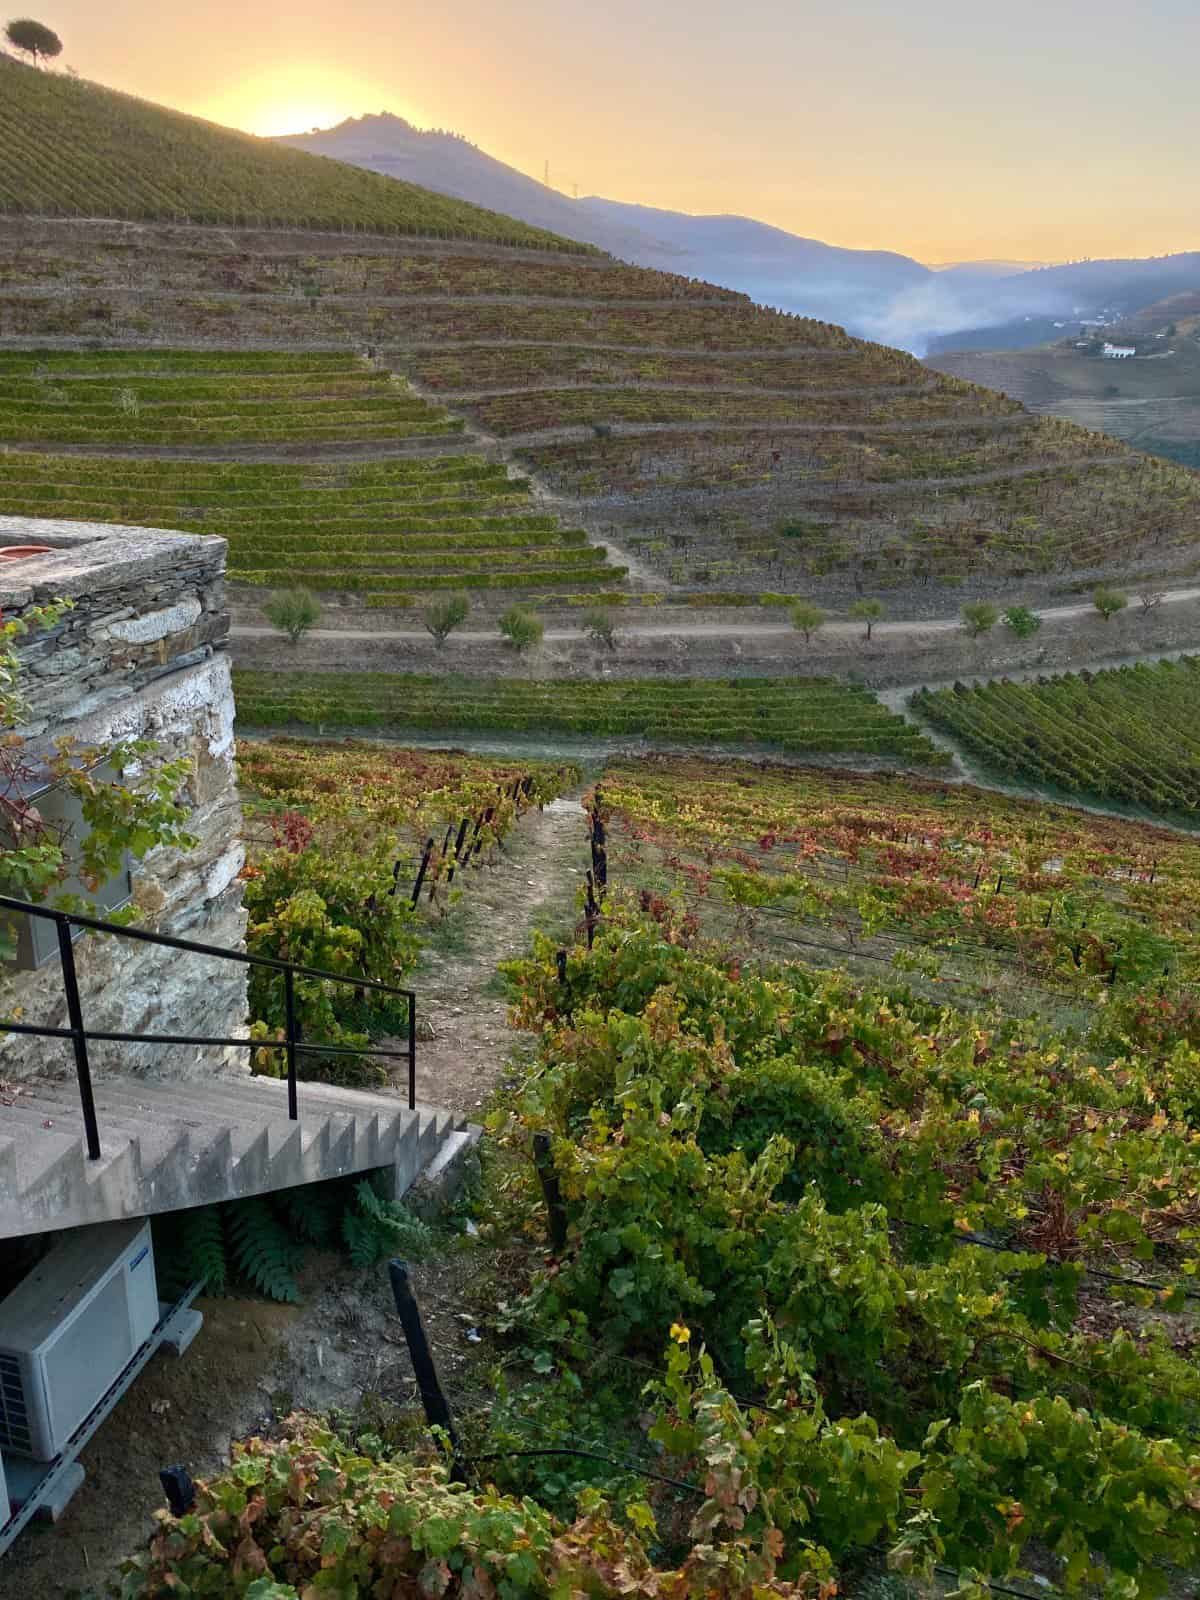 What to Do in the Douro Valley, Portugal | Stay in a centuries-old winery like Quinta Nova.